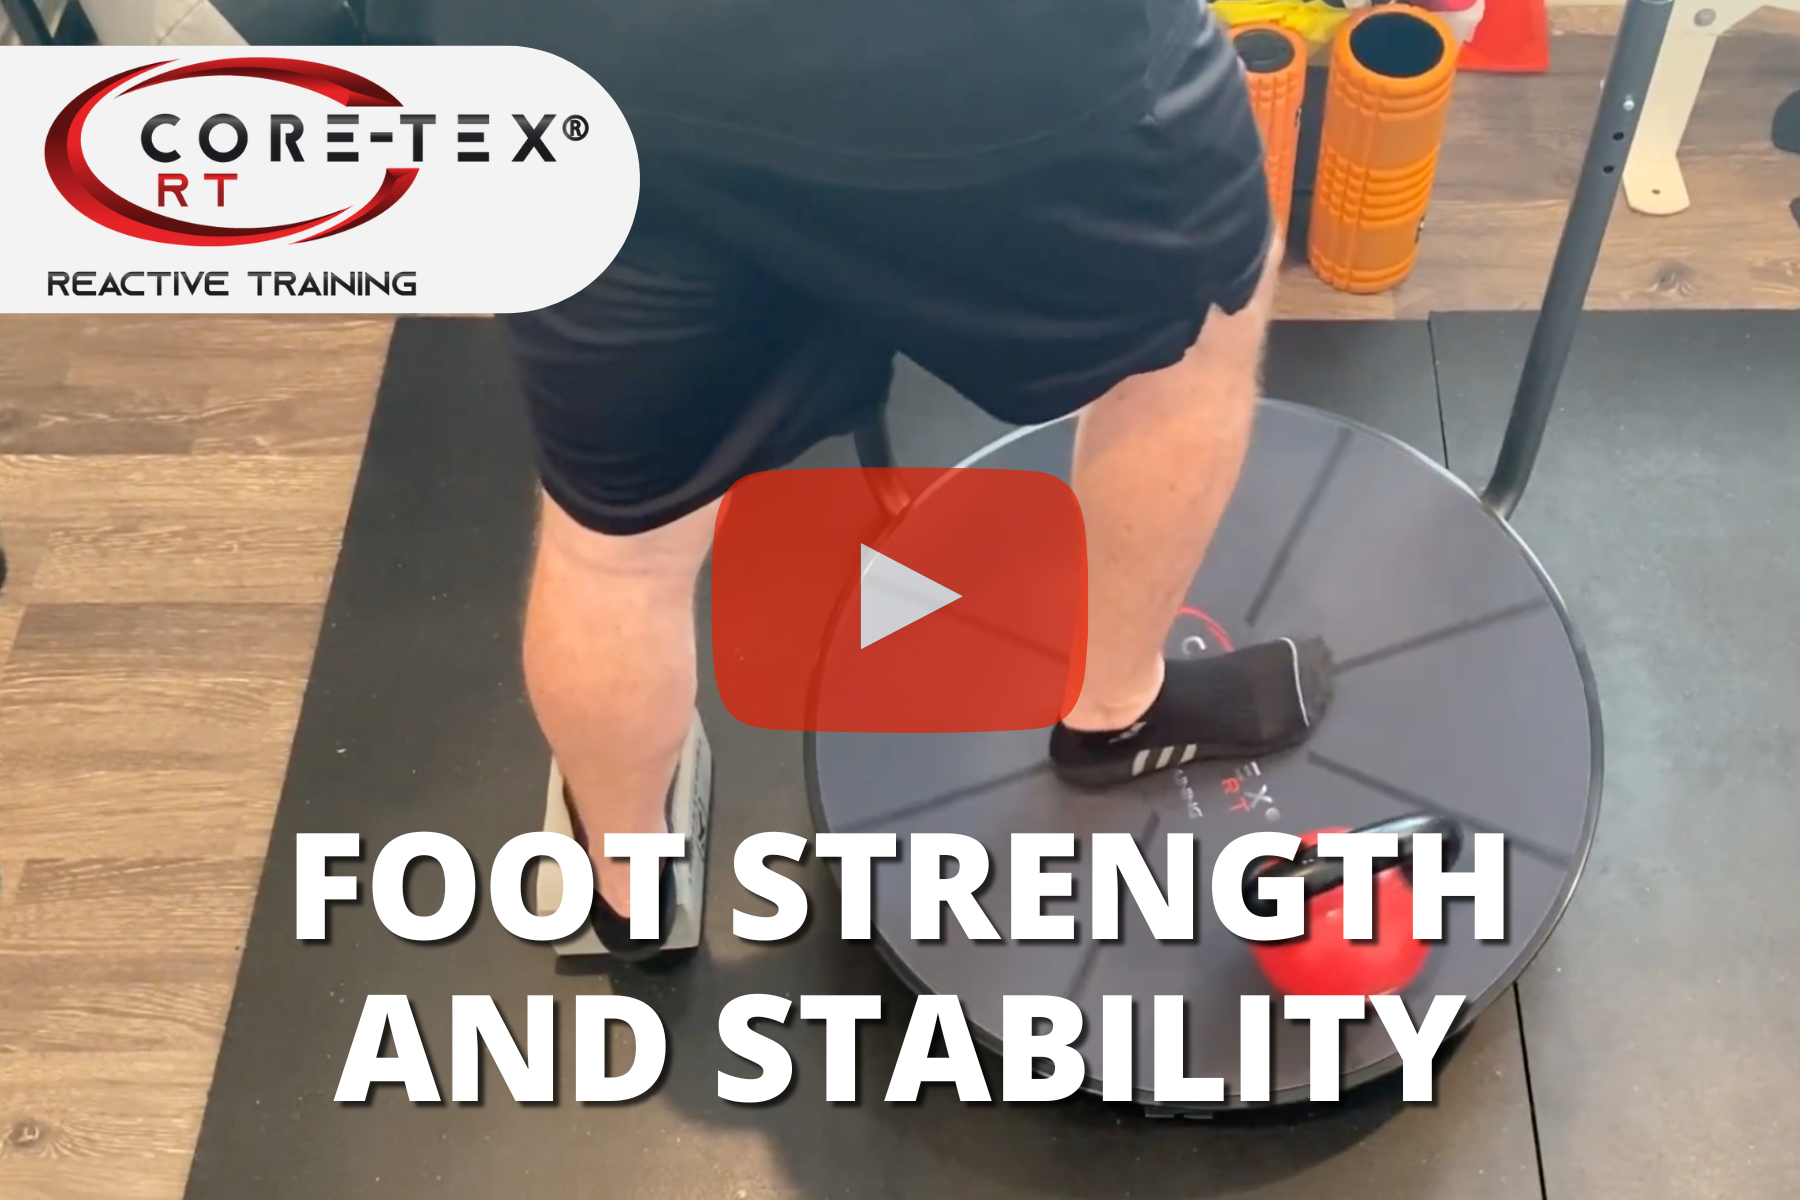 Foot Strength and Stability with Core-Tex